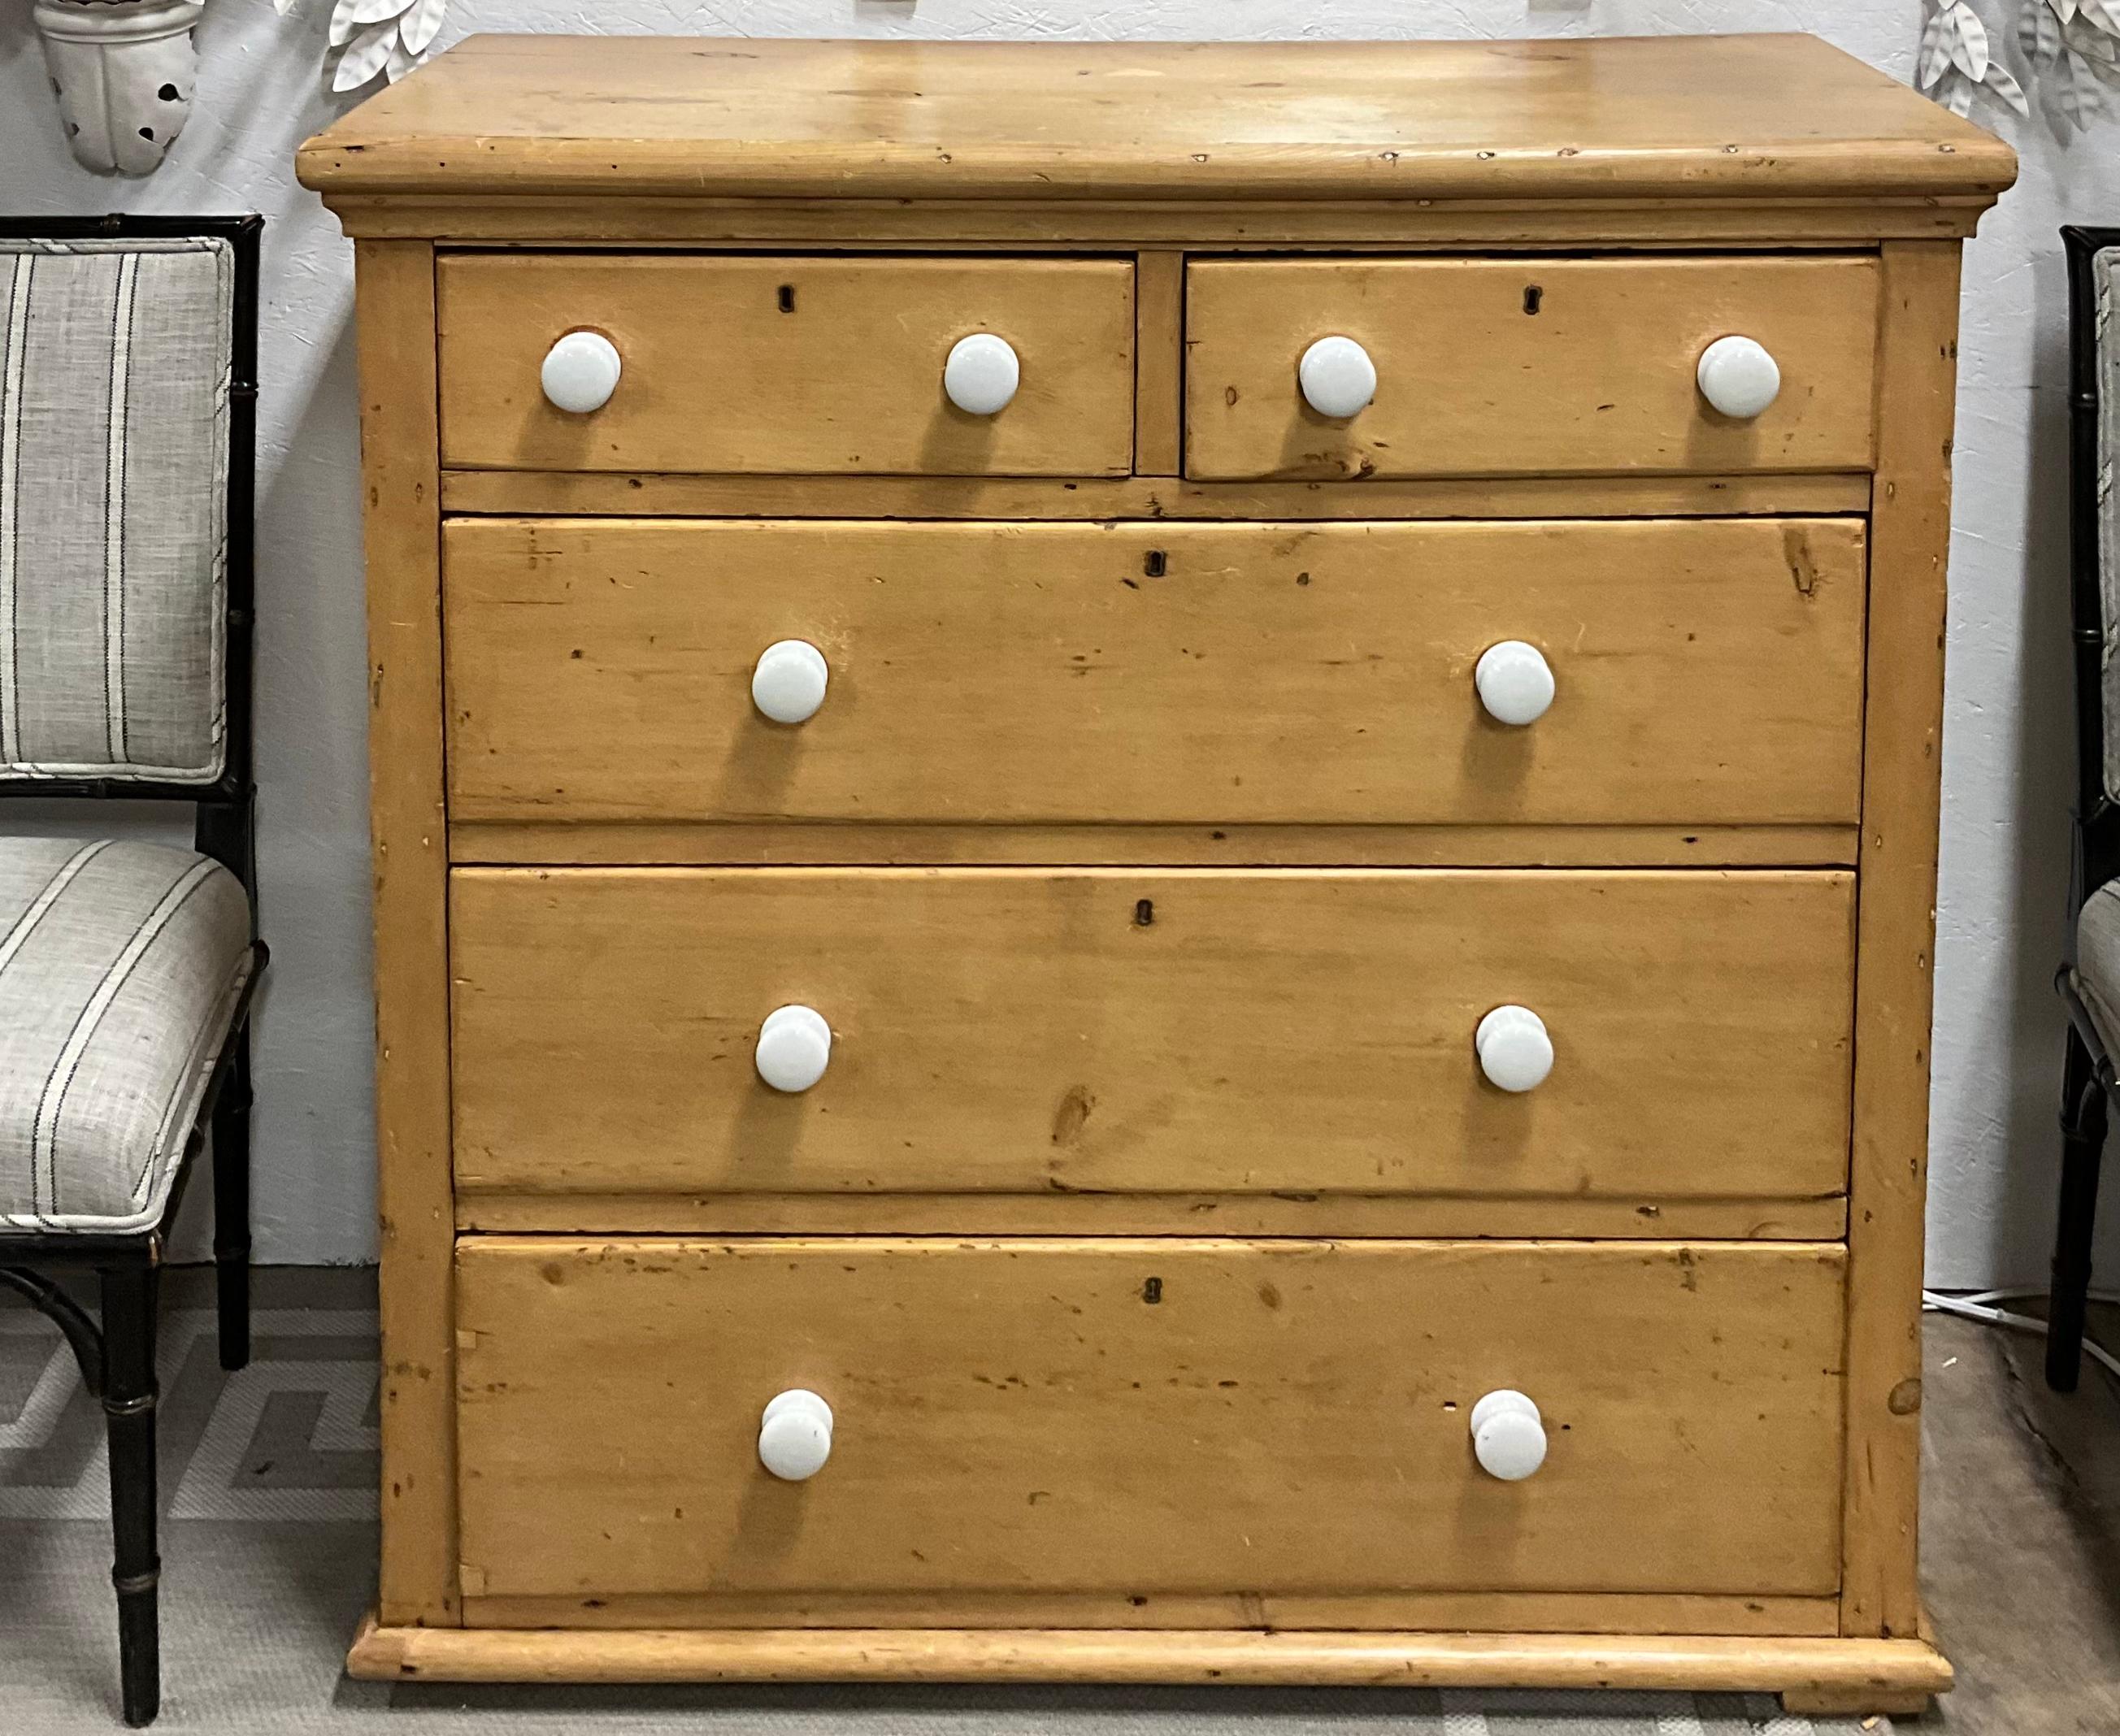 This is a wonderful antique pine chest! It is English and dates to the later part of the 19th century. The knobs are porcelain and appear to be original. Furthermore, someone has meticulously lined each drawer with blue and white ticking paper. I